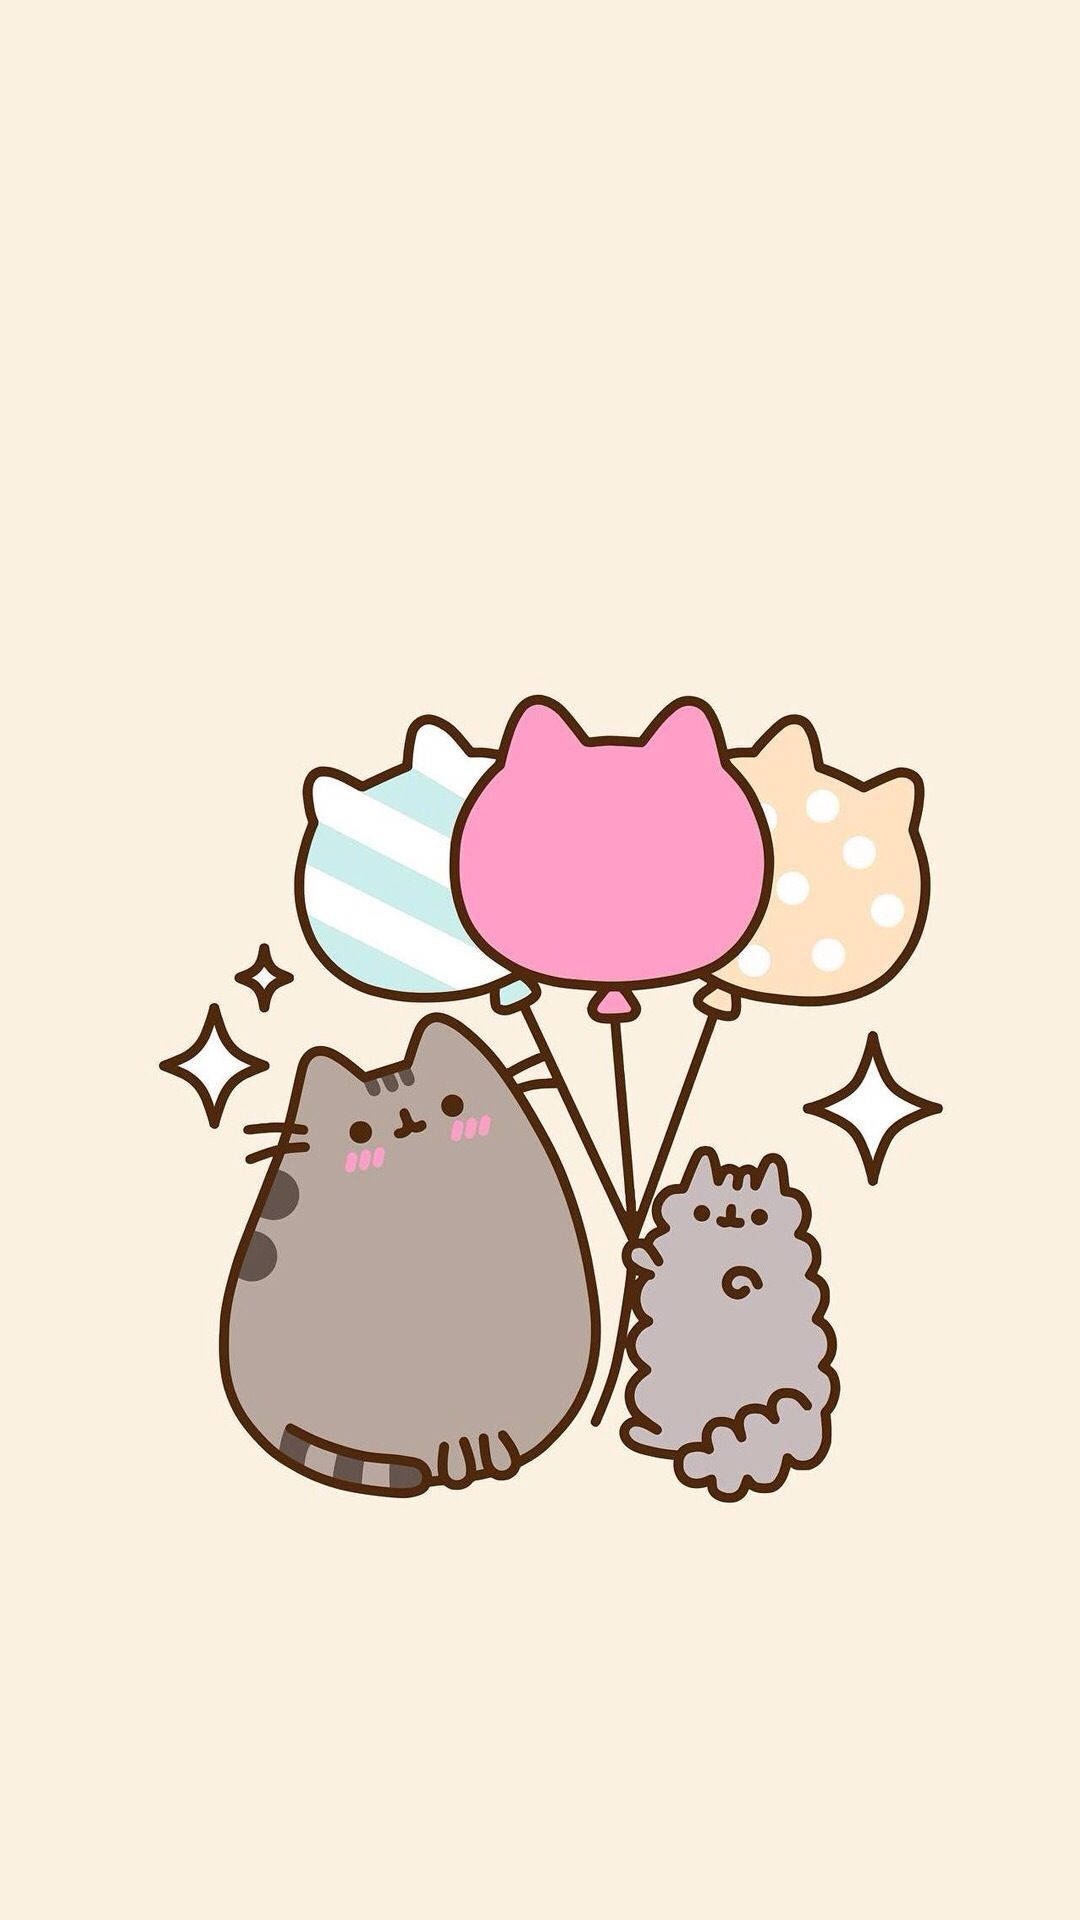 Pusheen And Stormy Balloons Wallpaper